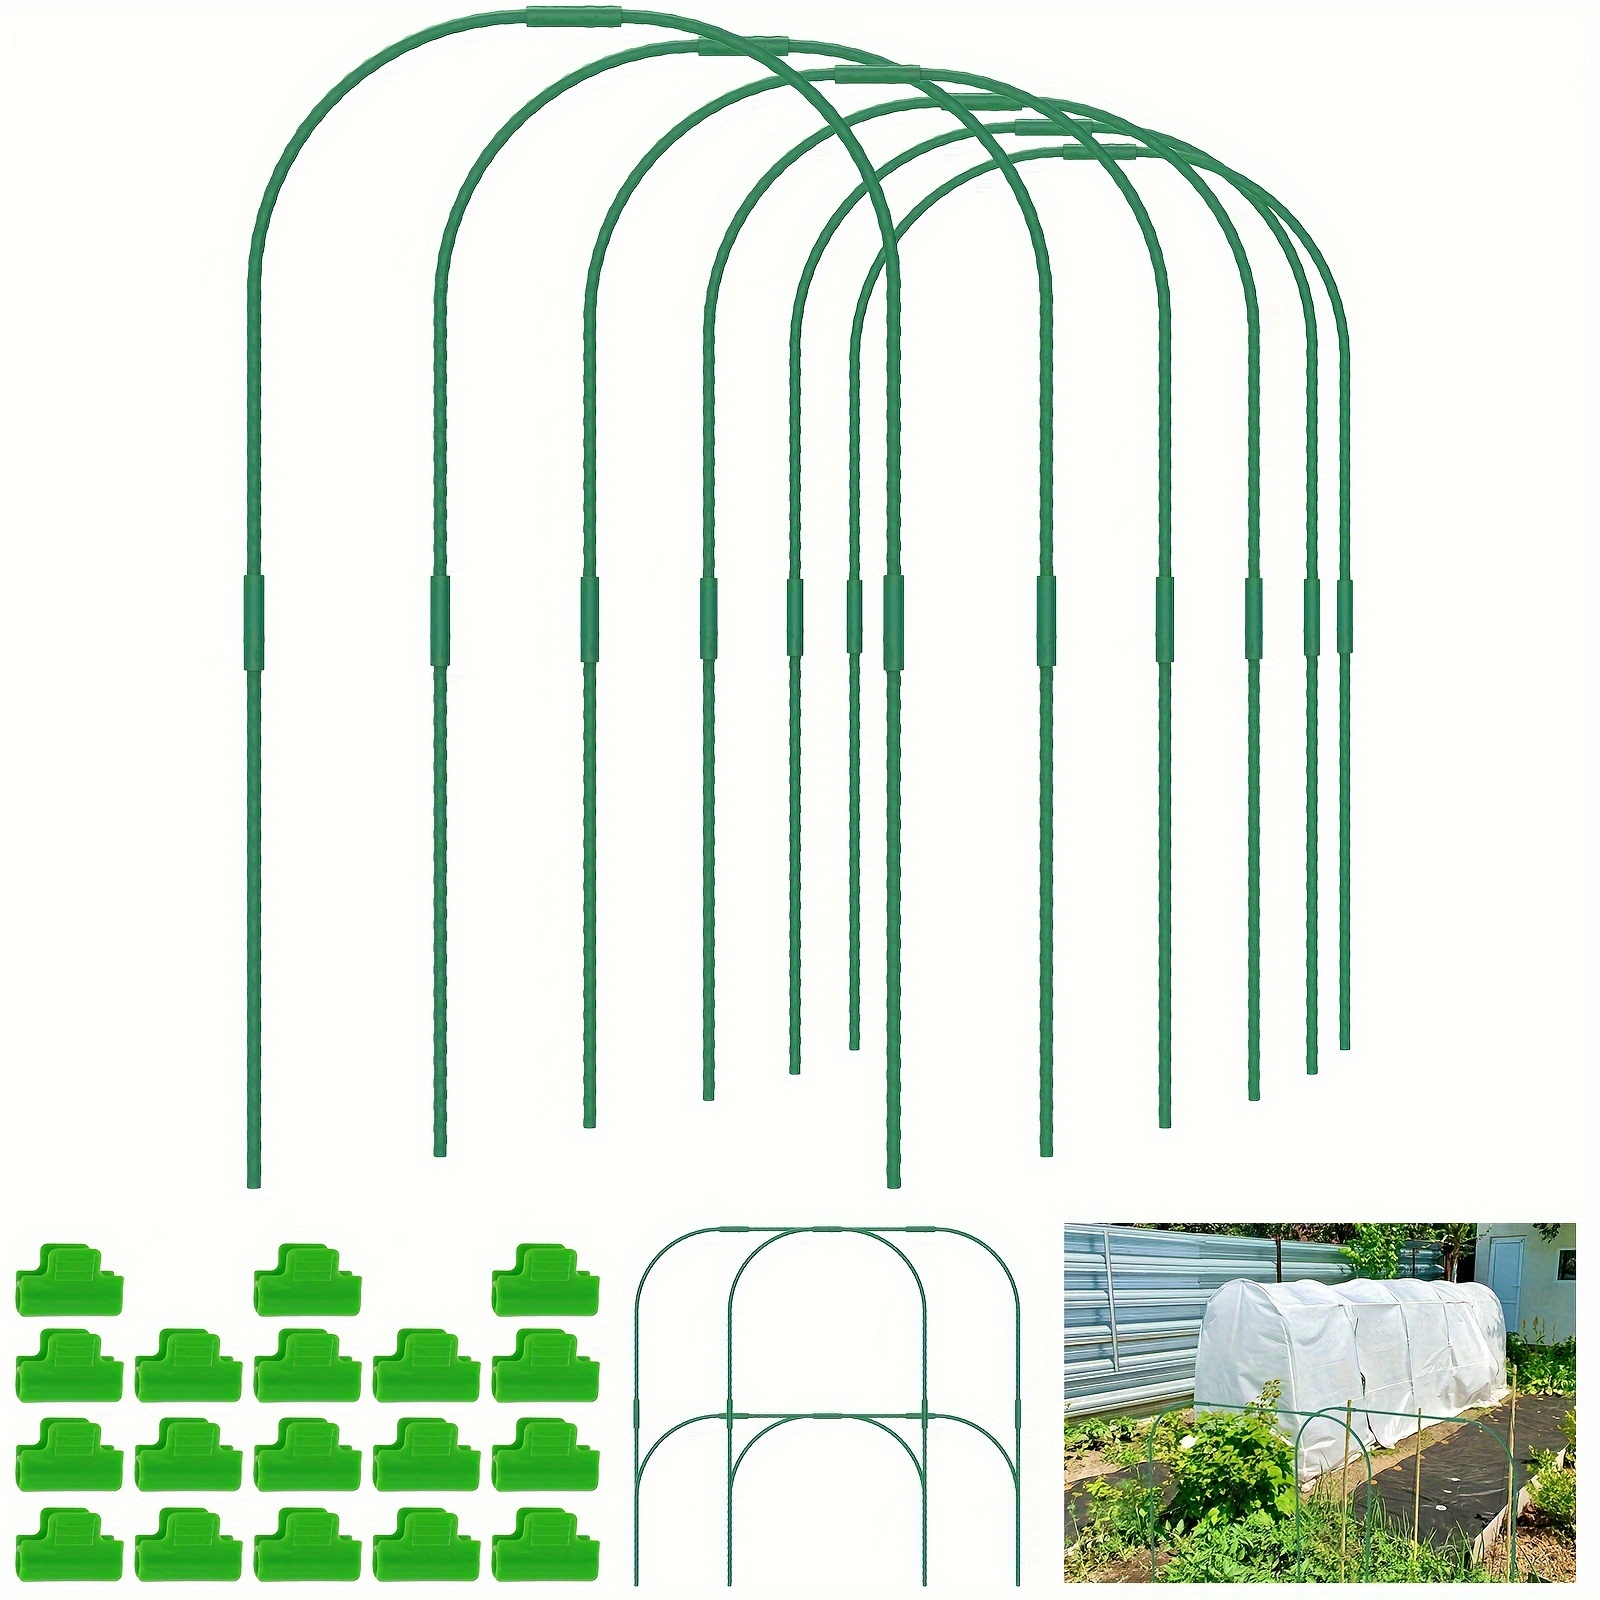 

24pcs, Greenhouse Hoops Kit, 4ft X 19.7in Steel Support Grow Tunnel Frame, Diy Garden Plant Hoops With 18 Clips, Plastic-coated For Durability, Garden Stakes For Plant Support And Protection